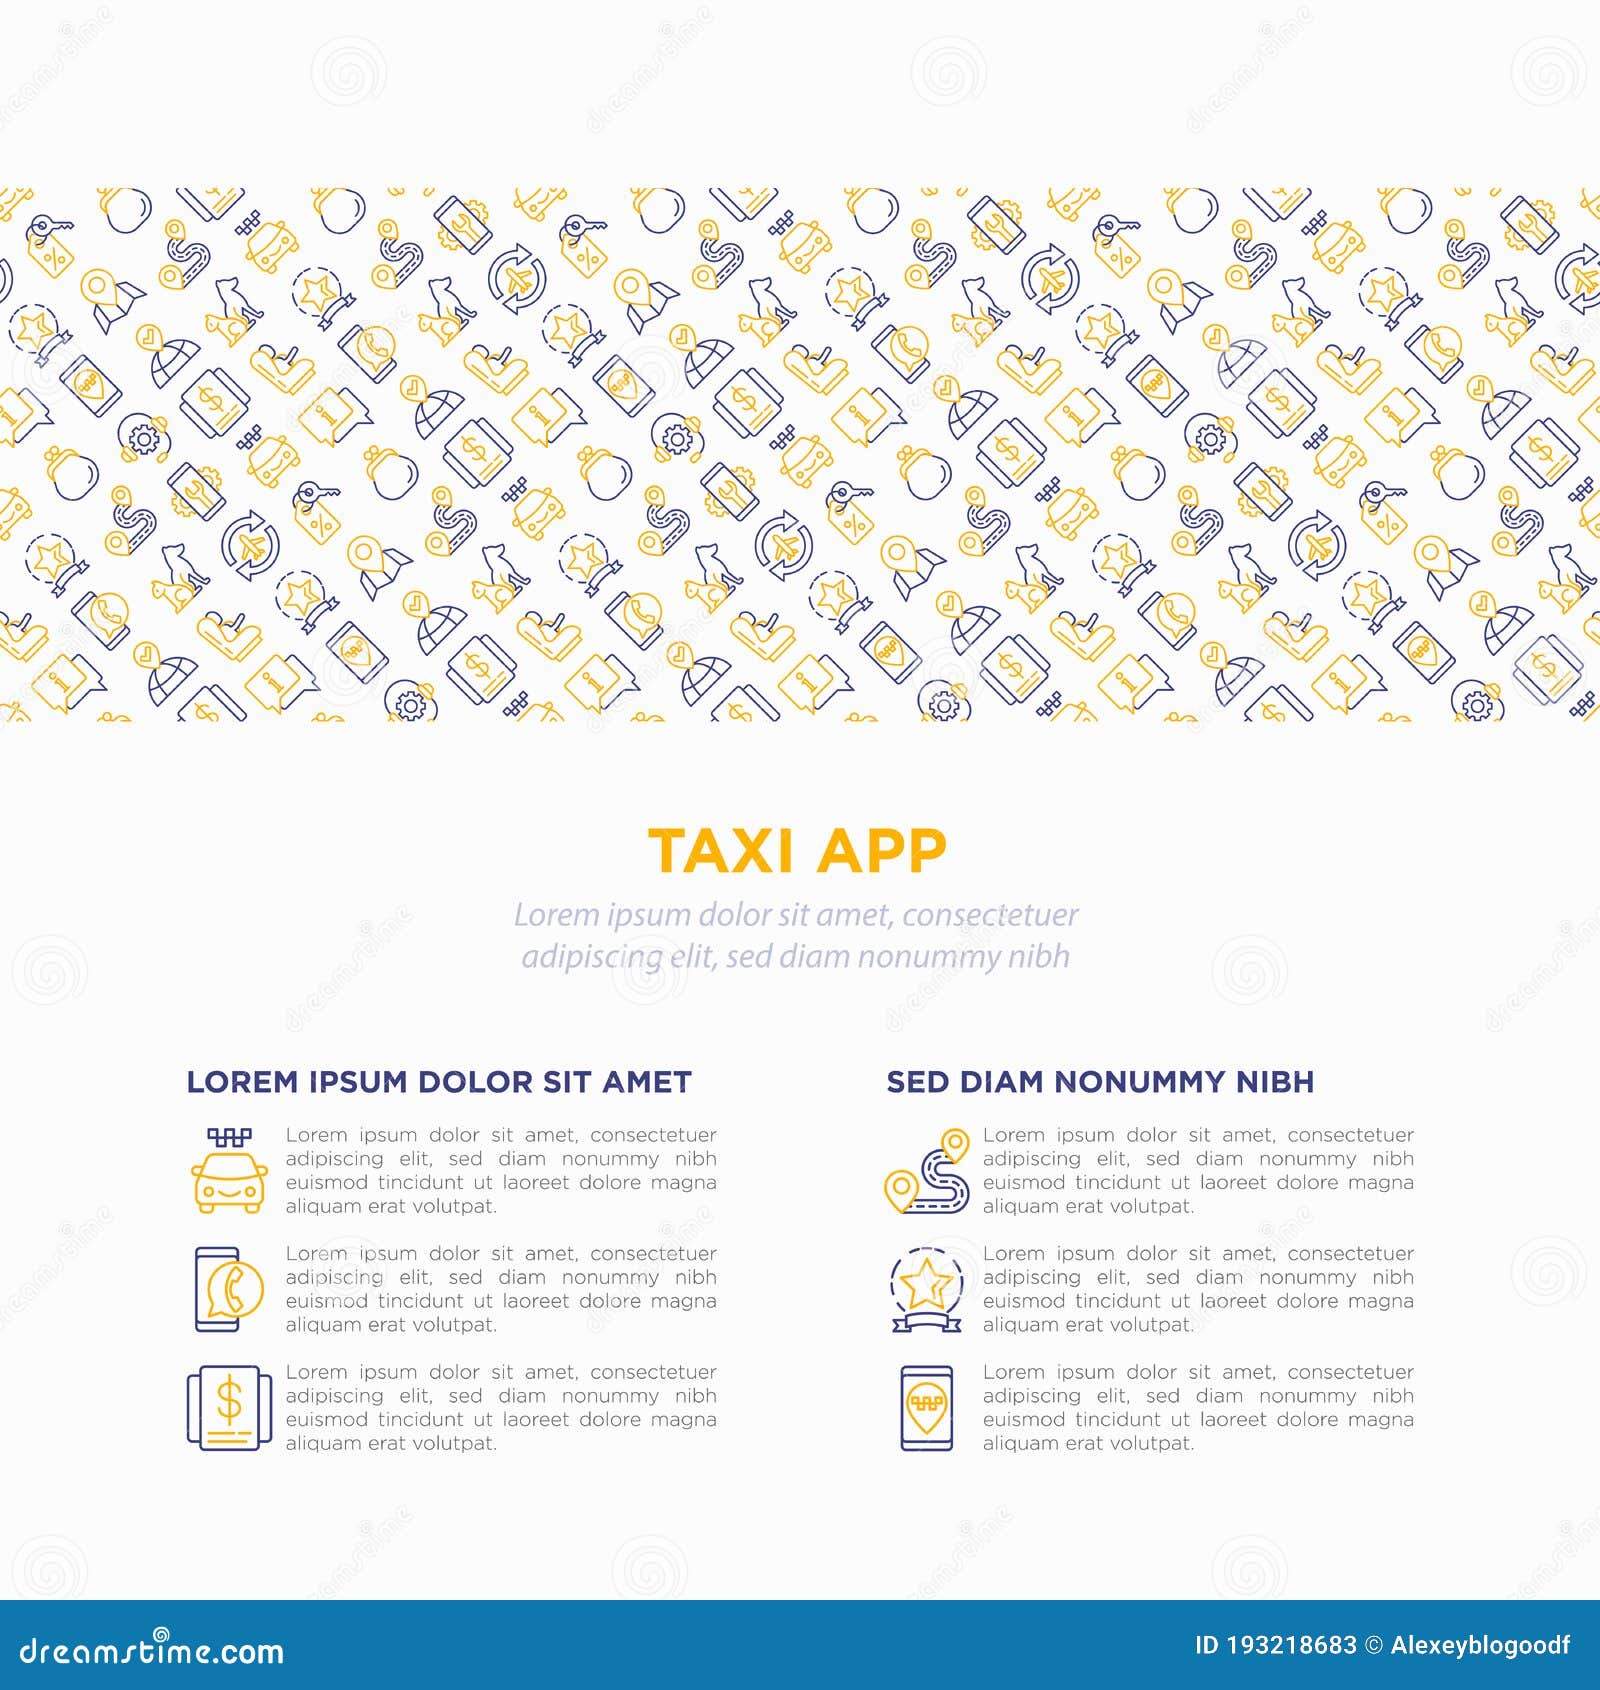 taxi app concept thin line icons payment method promocode settings info support service phone number location pointer airport 193218683